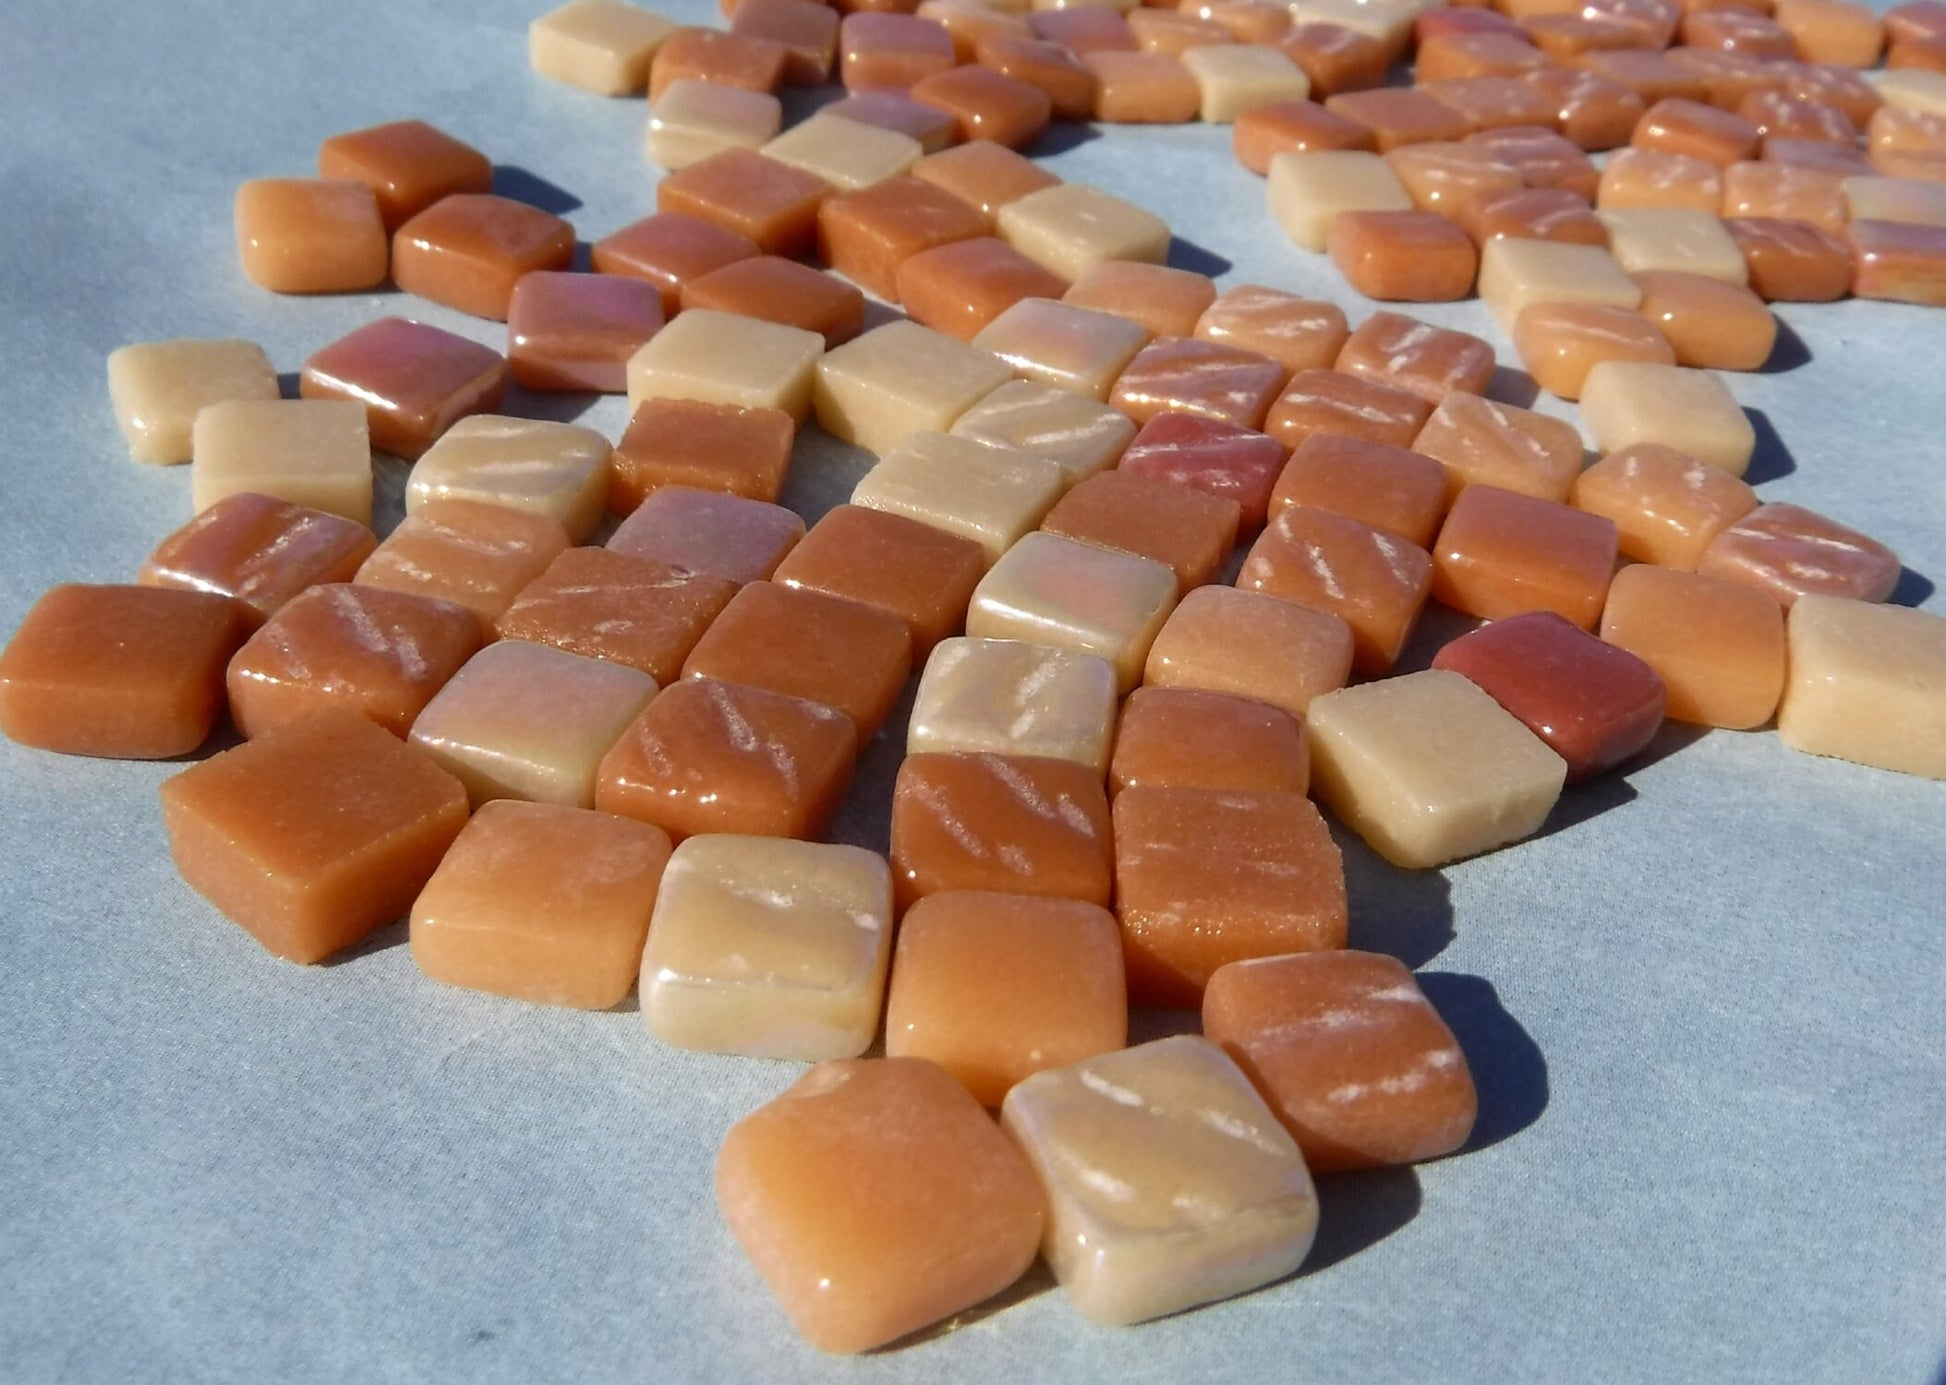 Caramel Mix Mini Glass Tiles - 8mm Square - 50 grams Opaque Glass Solid Color Mix of Bright and Pale Brown Iridescent and Matte Tiles